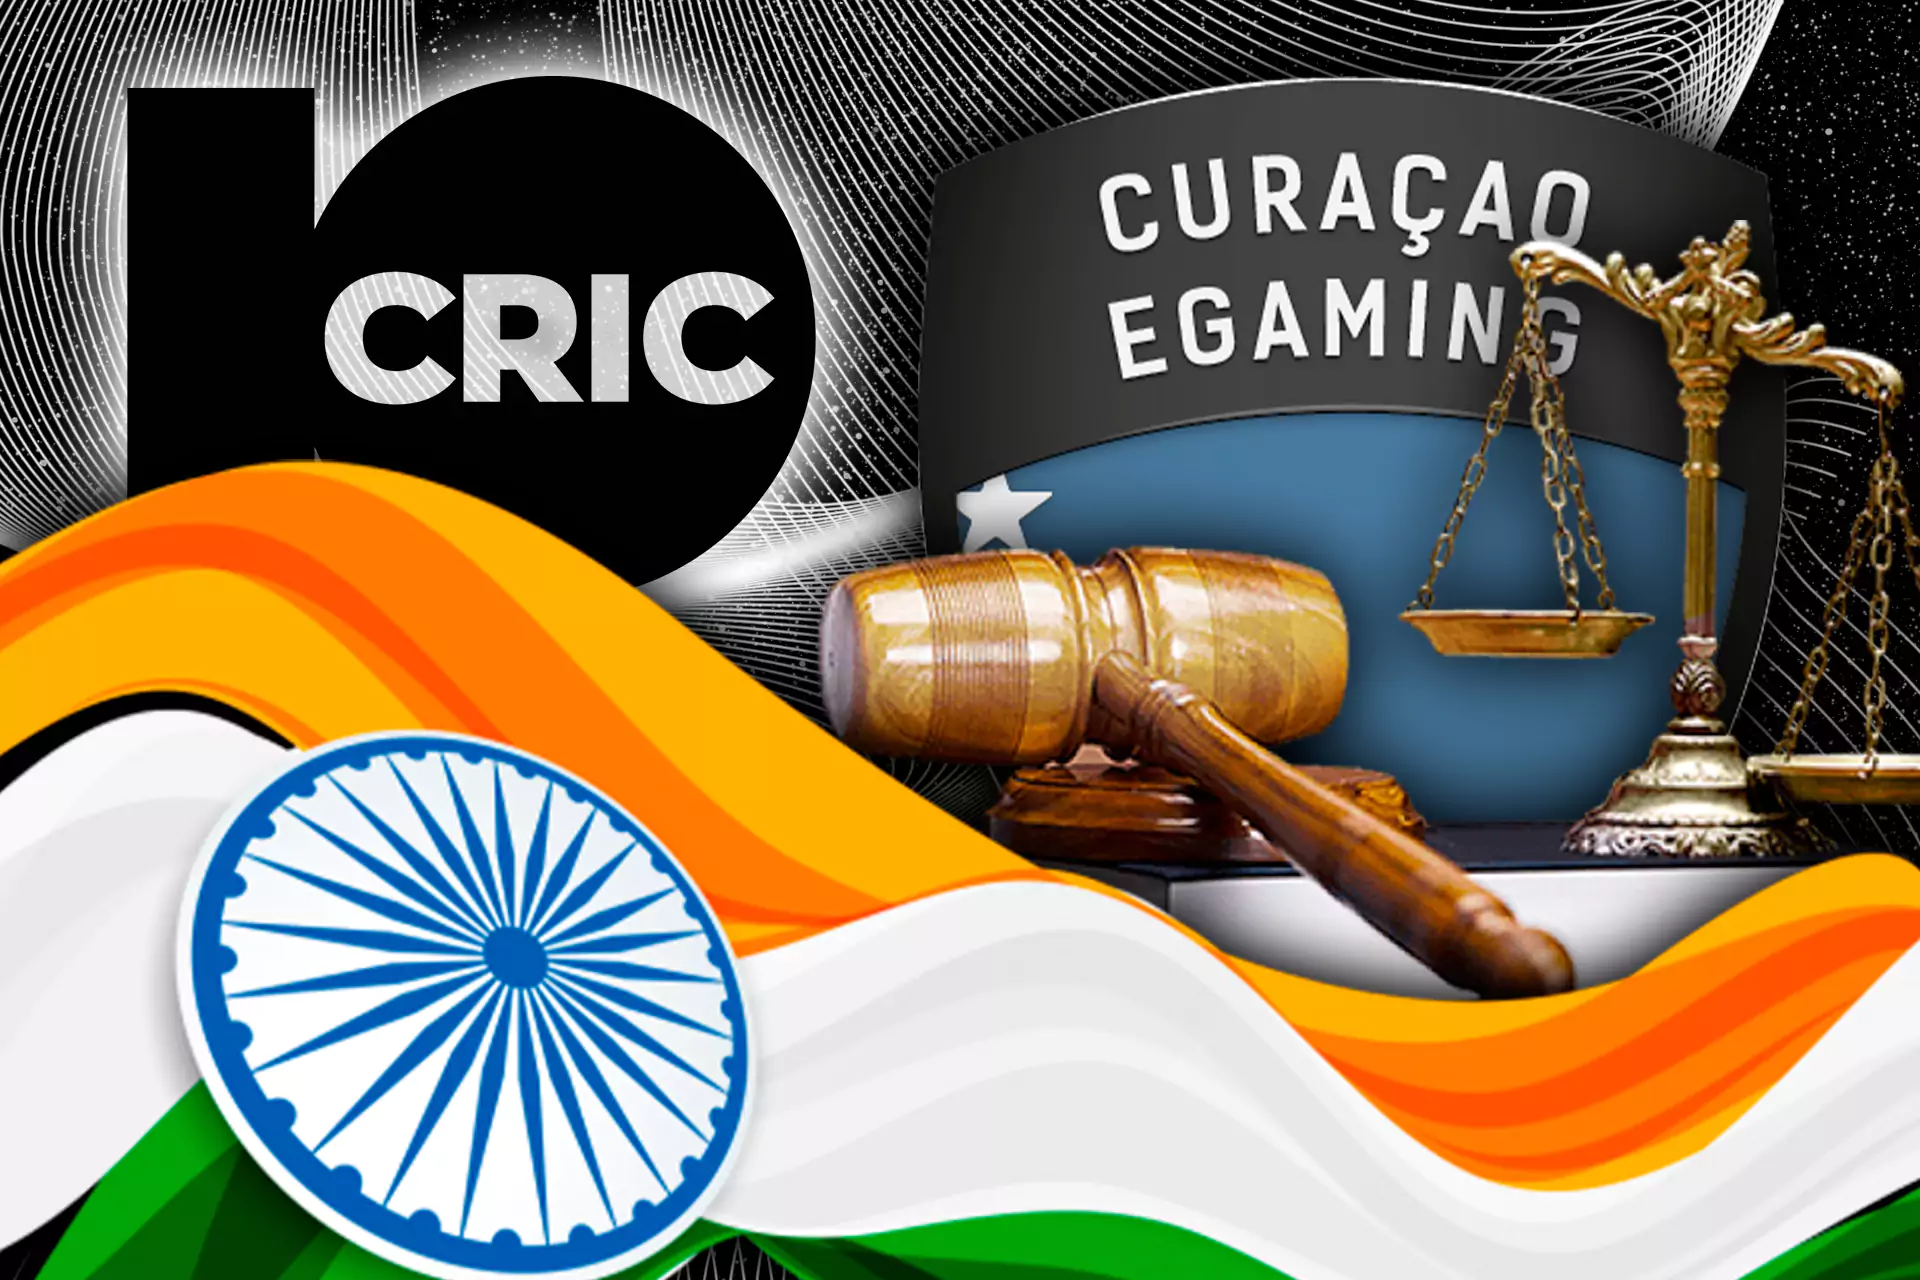 Thanking the Curacao Egaming license, the site of 10Cric Casino works legally in India.